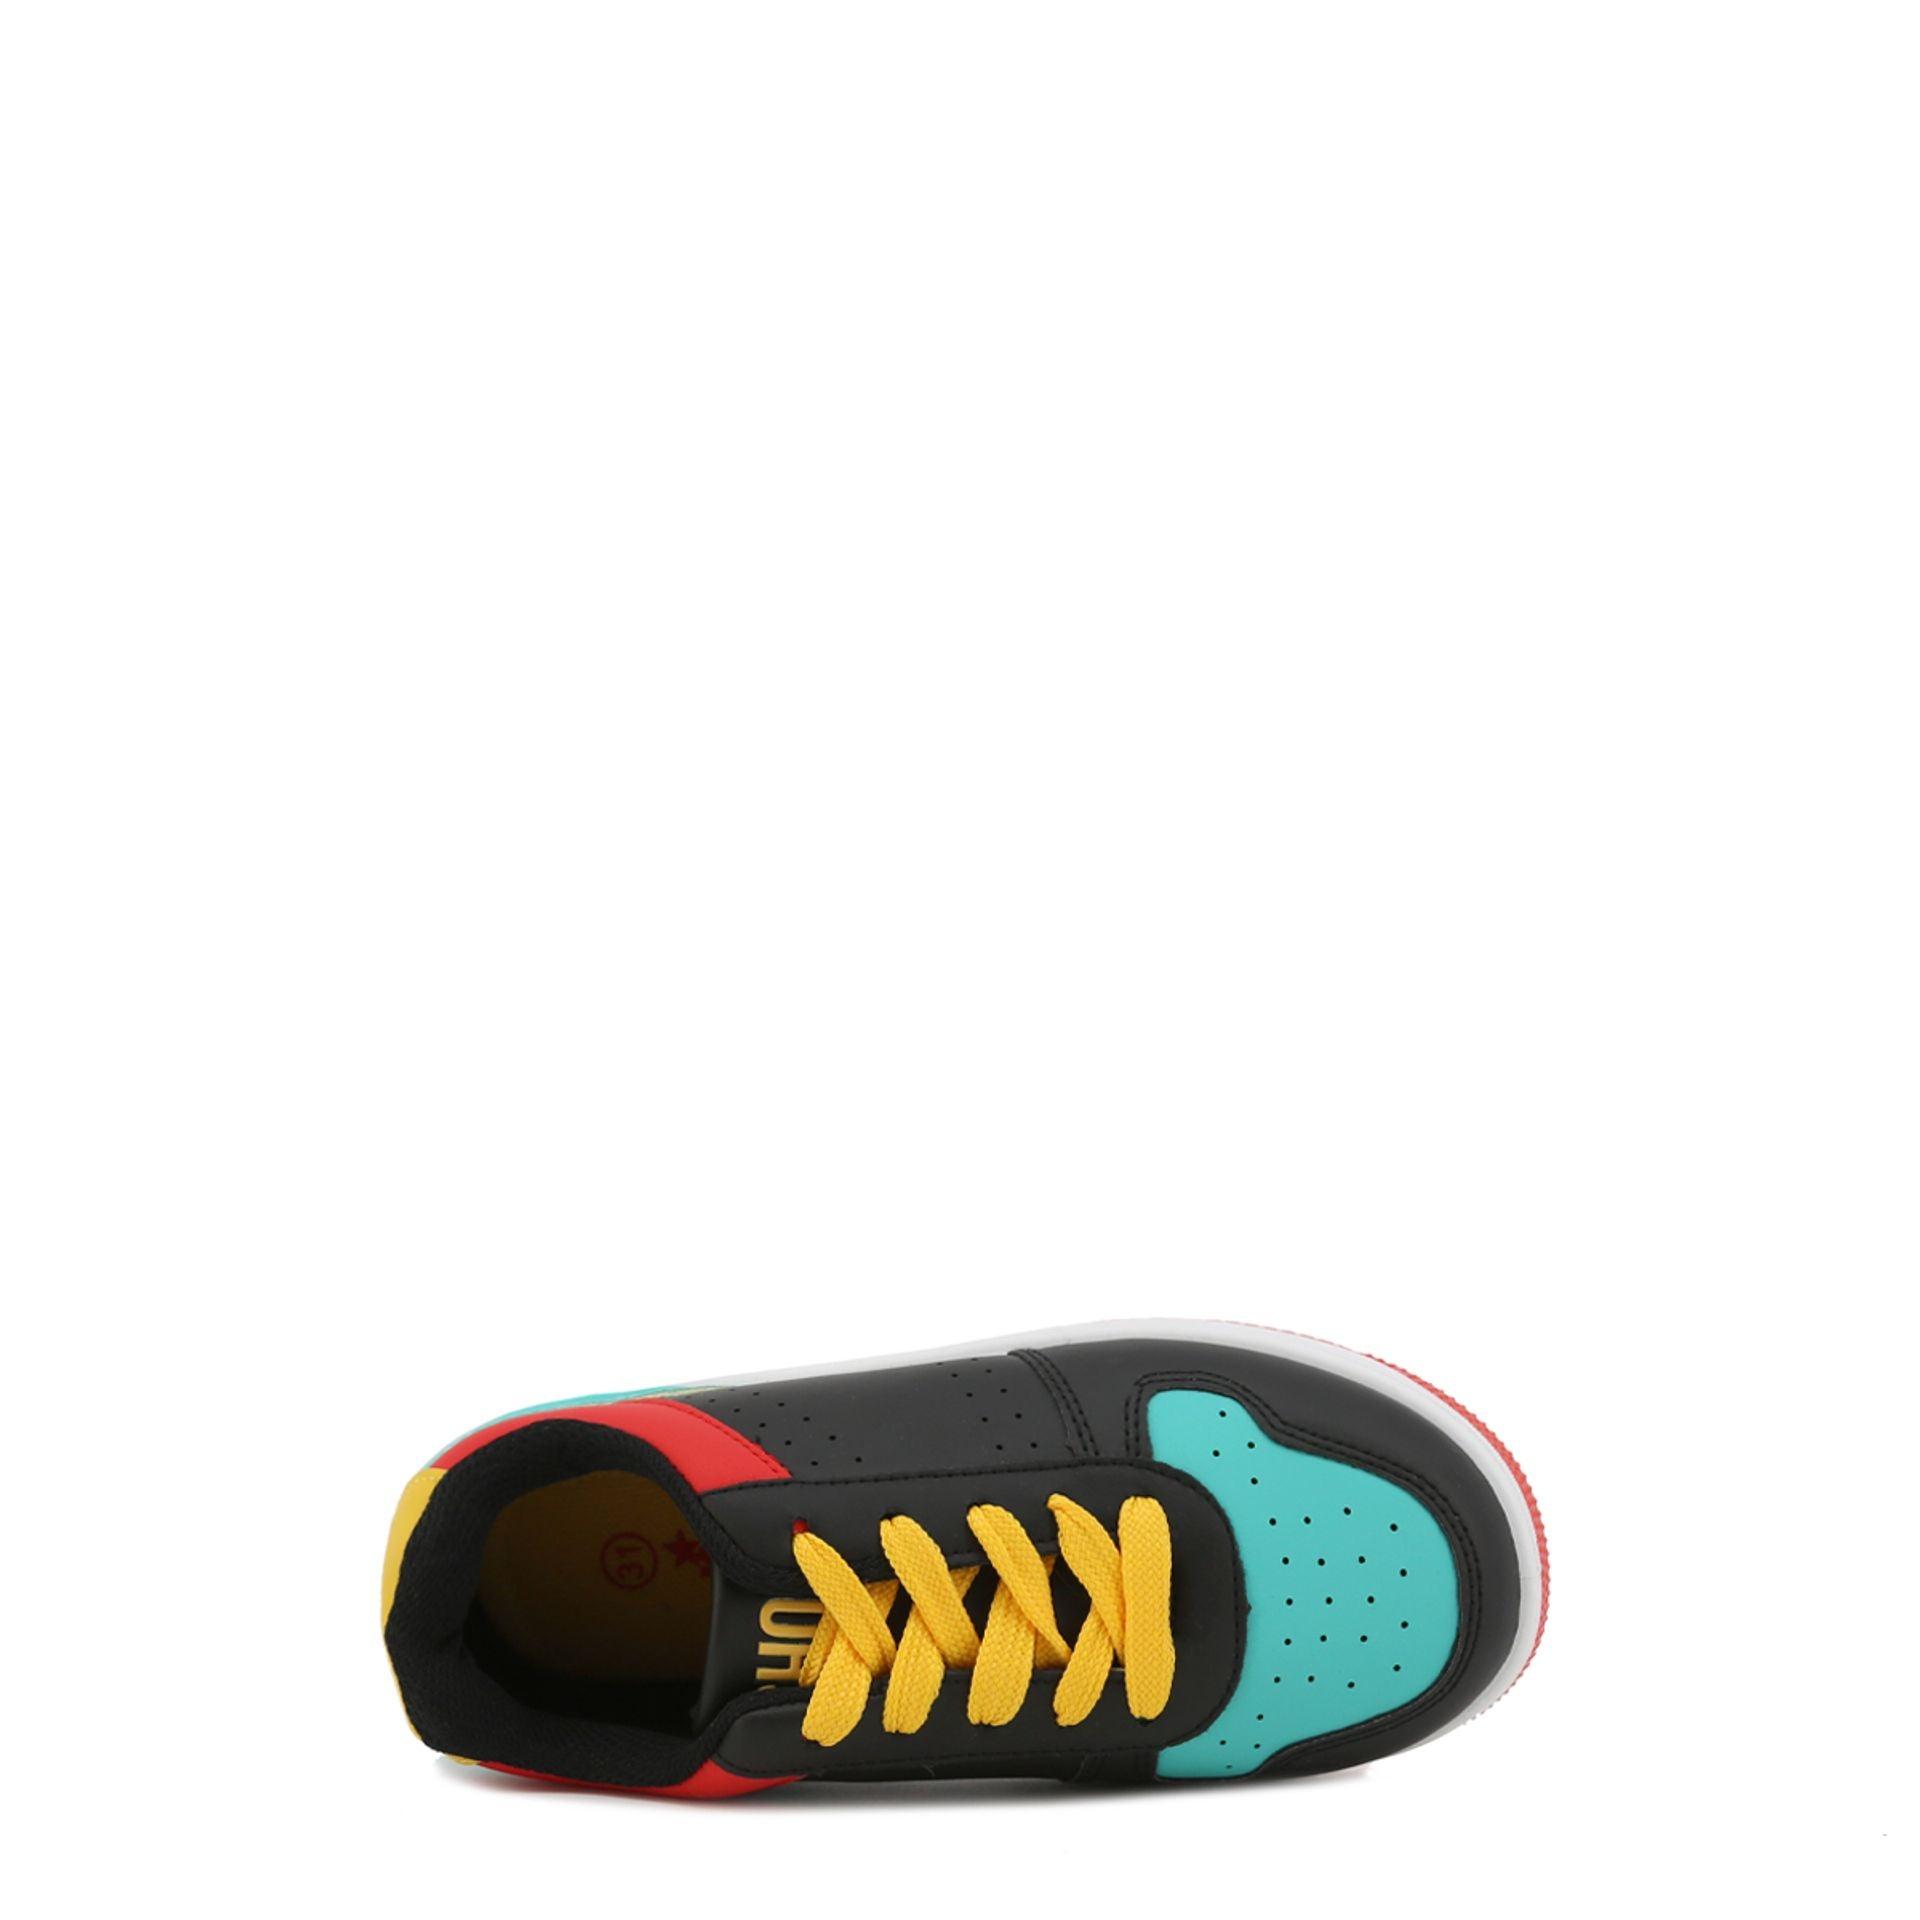 Kids Sneakers - Shone Sneakers Shoes - Trainers - Sneakers - Guocali